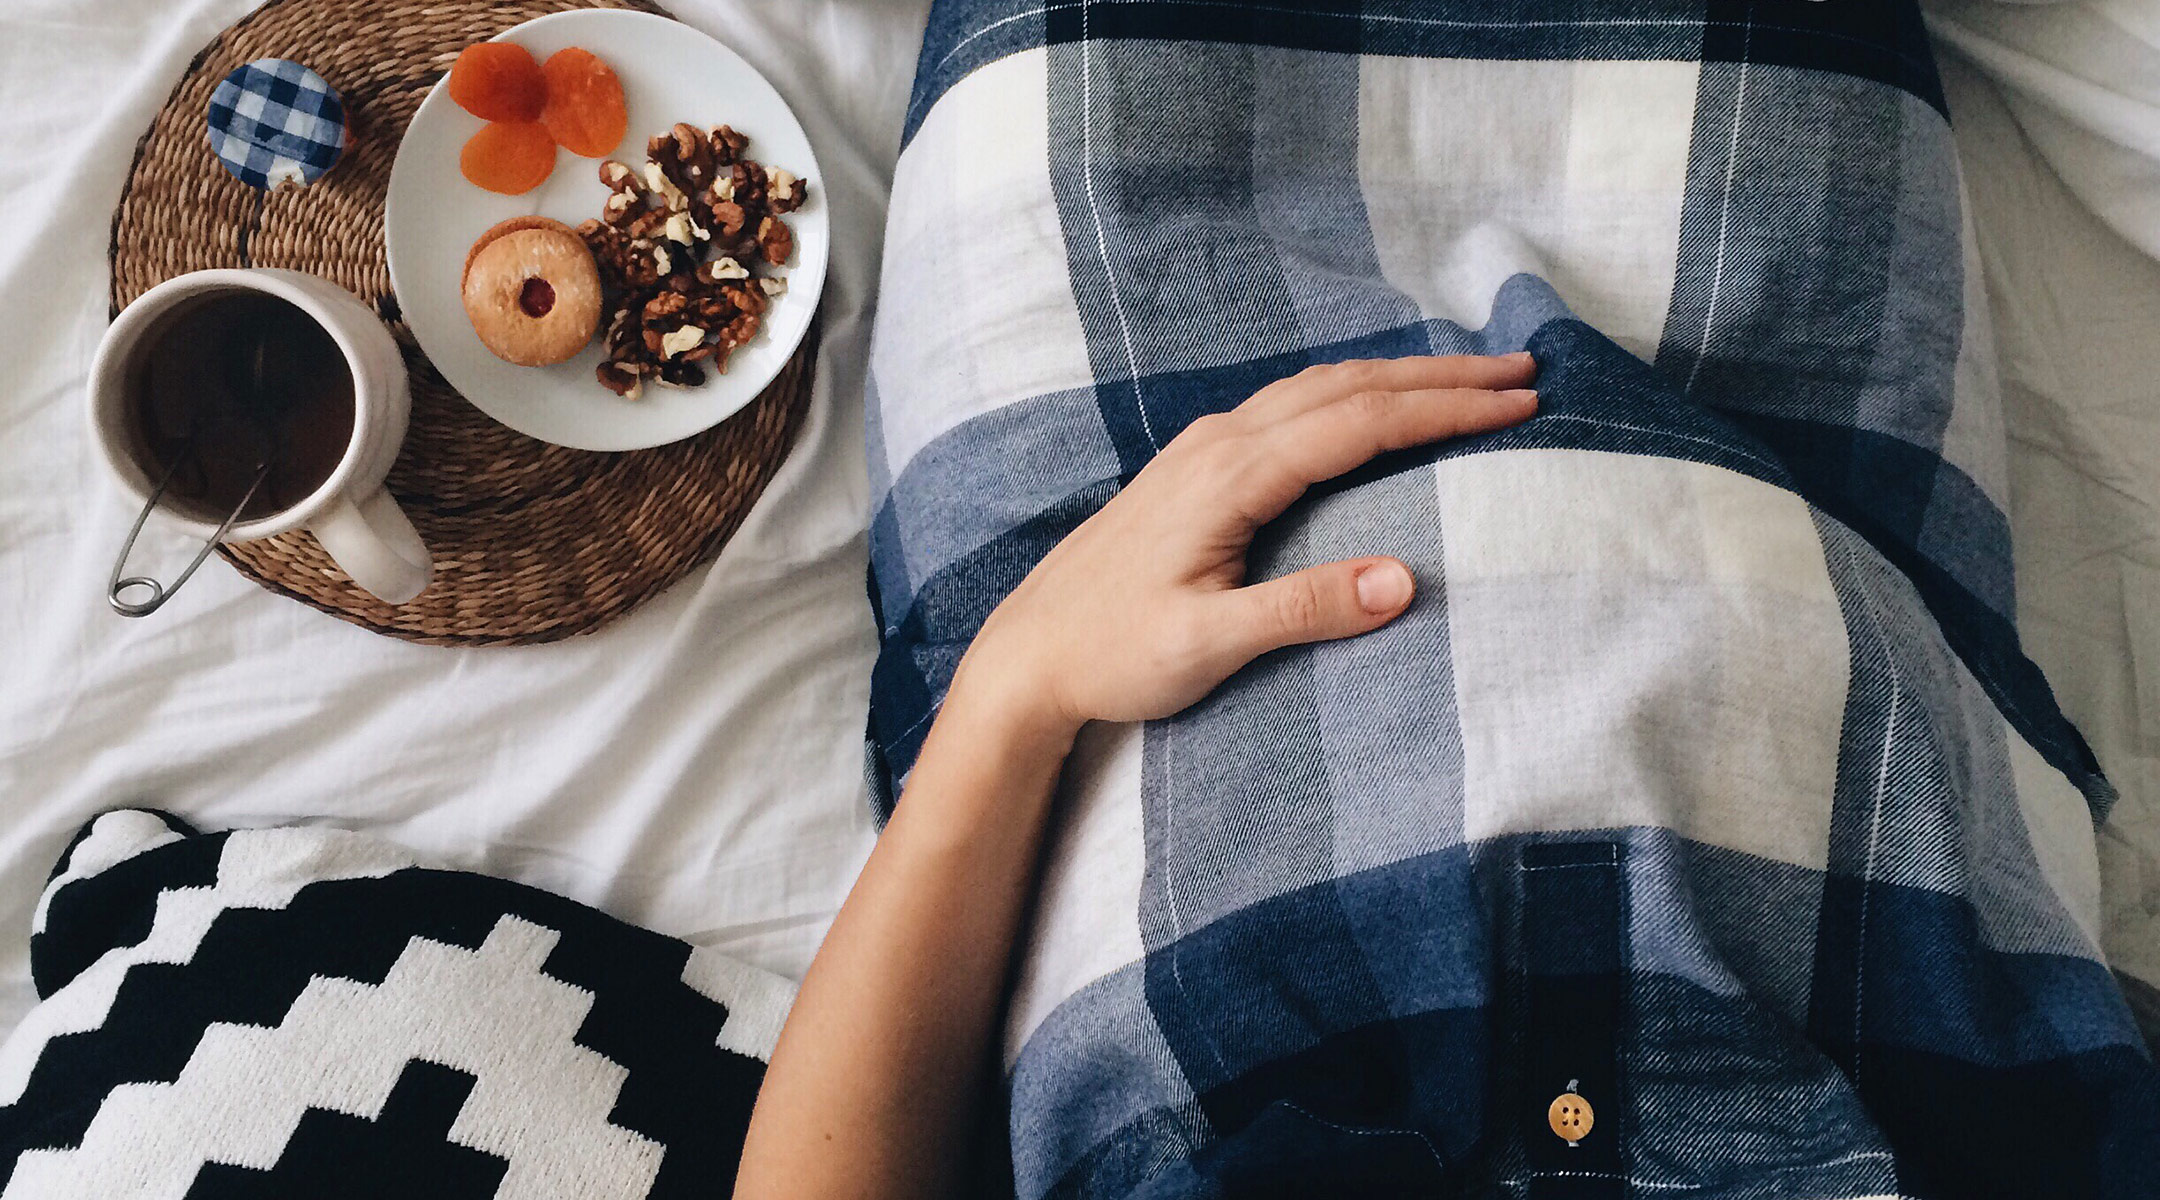 pregnant woman in bed with plate of food